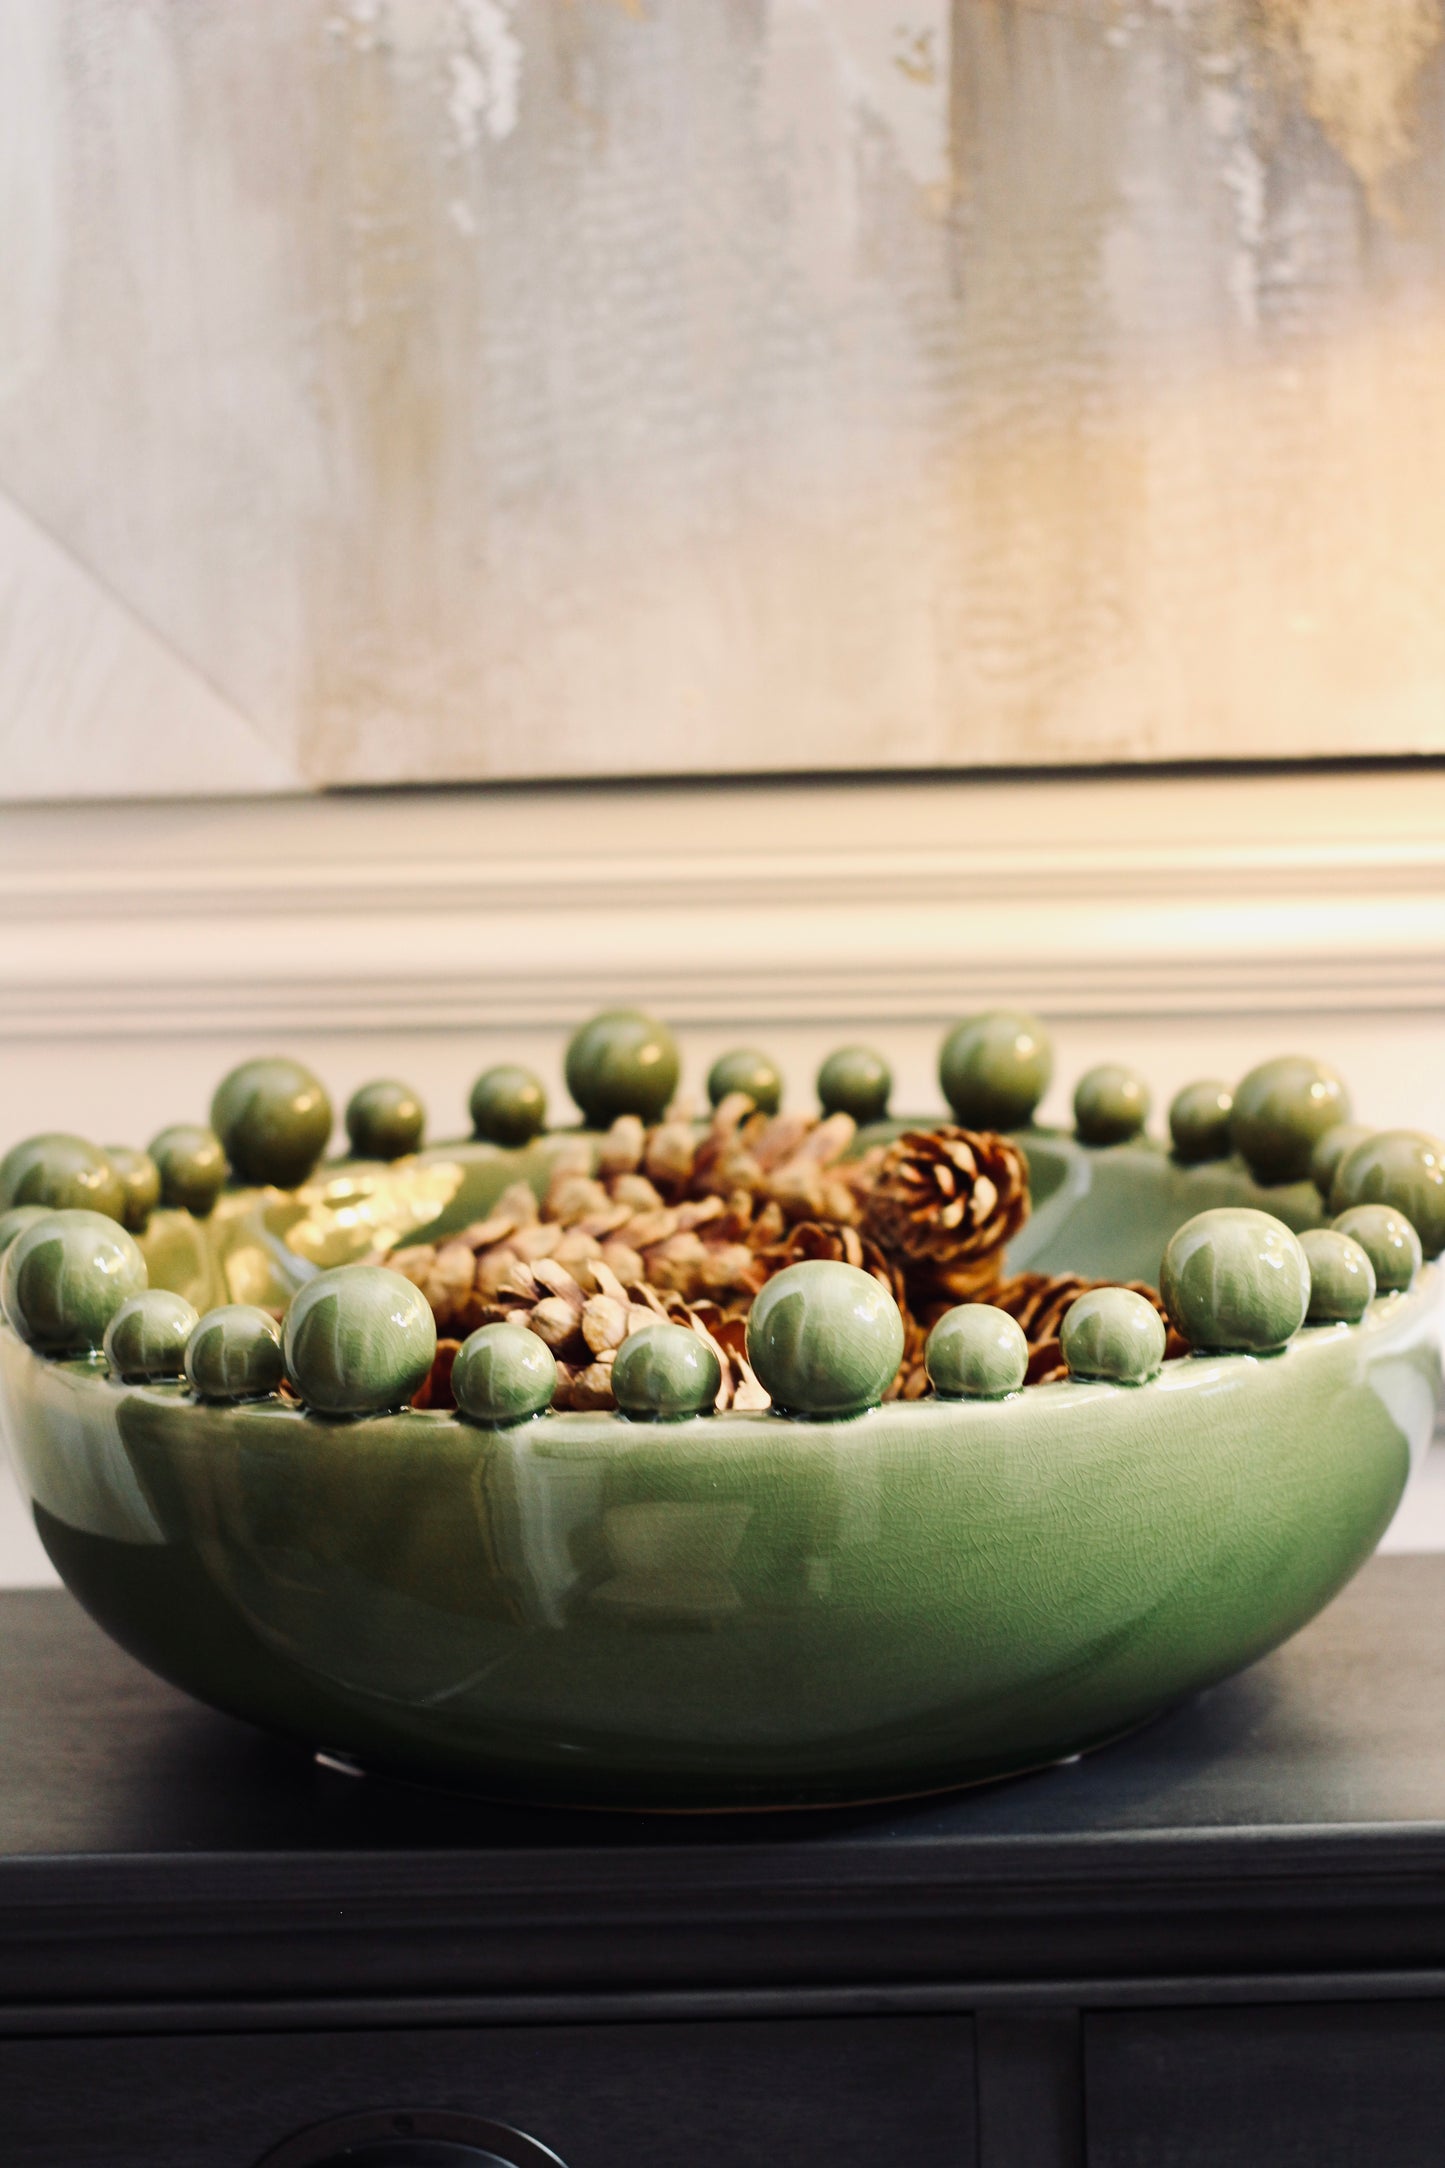 Green Bowl With Bobbled Edge